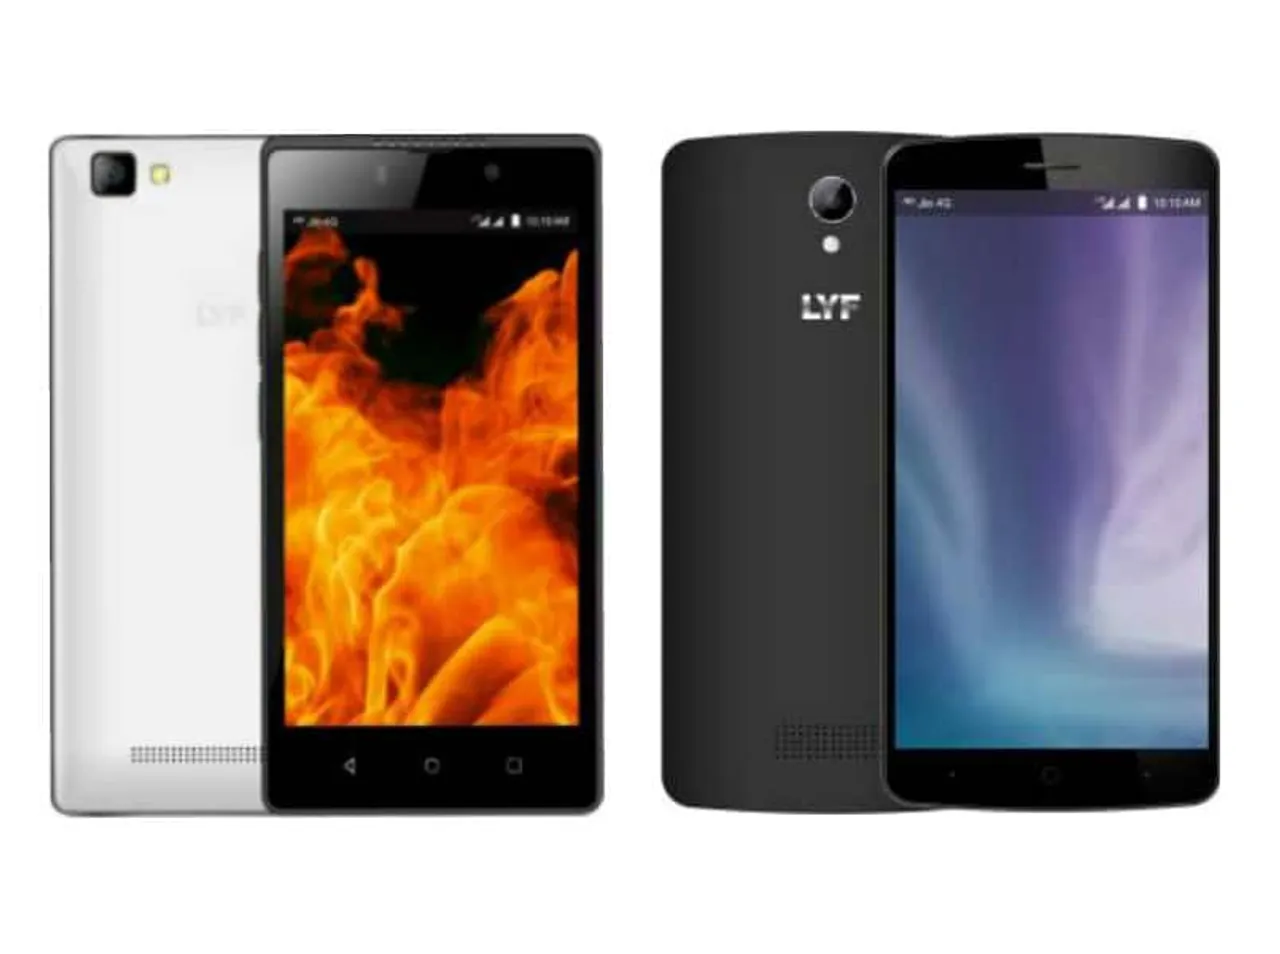 Flipkart to sell Reliance LYF Smartphones-WIND 3, FLAME 8 exclusively